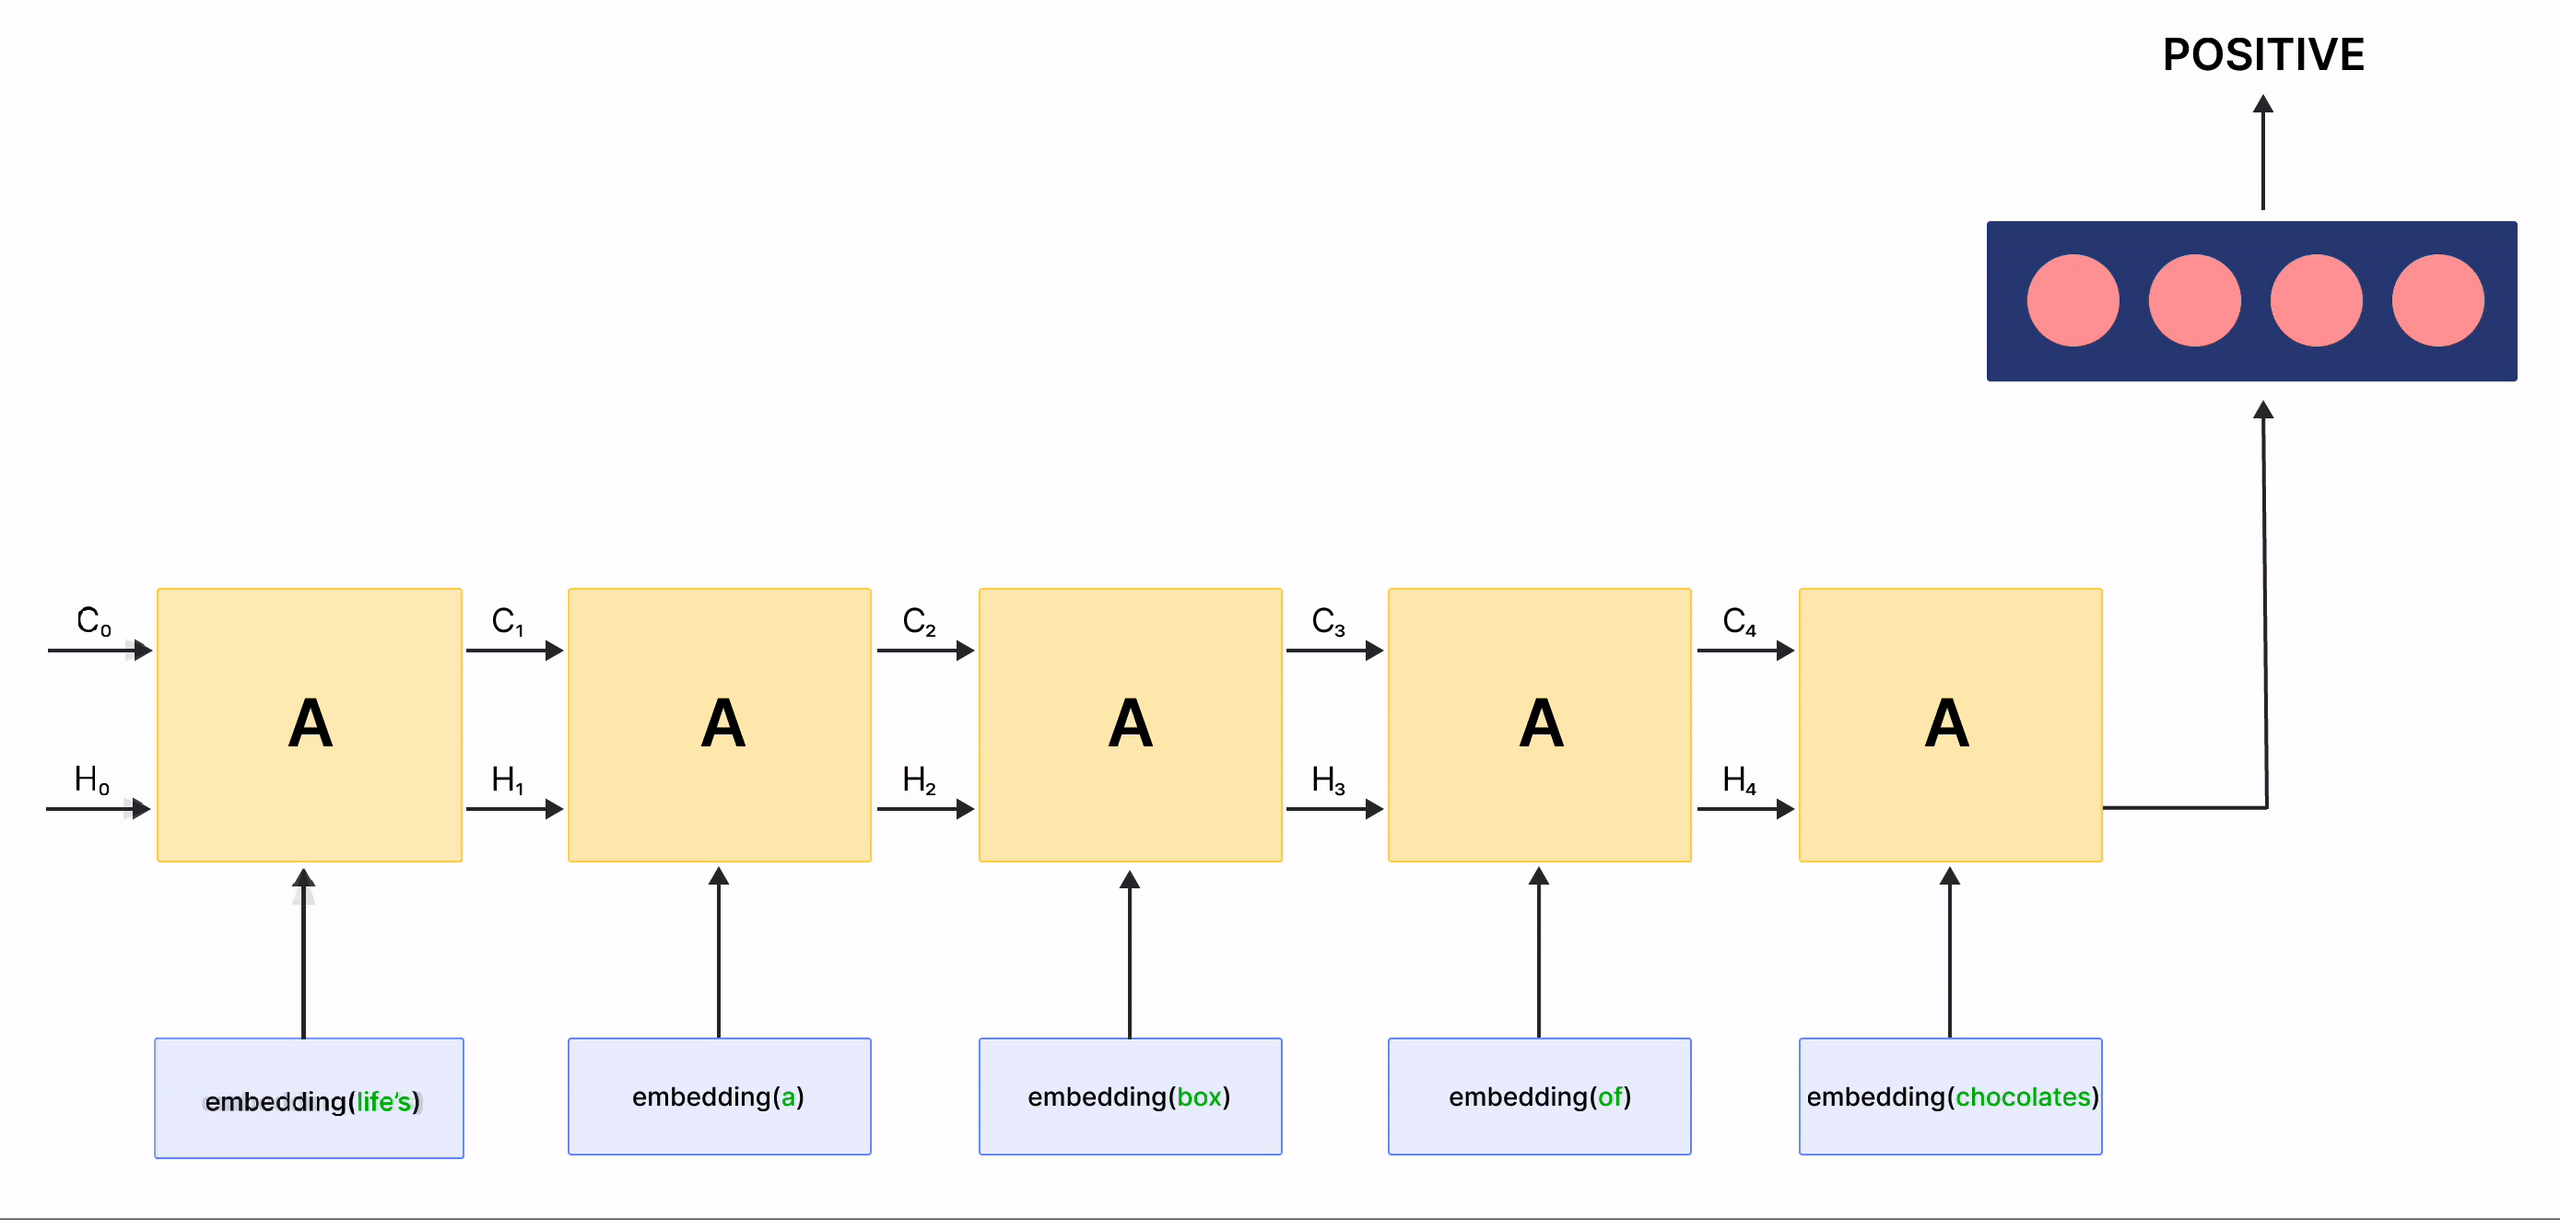 Overview of the model architecture, showing a series of animated boxes. There are five identical boxes labeled A and receiving as input one of the words in the phrase "life's a box of chocolates". Each box is highlighted in turn, representing the memory blocks of the LSTM network as information passes through them, ultimately reaching a "Positive" output value.